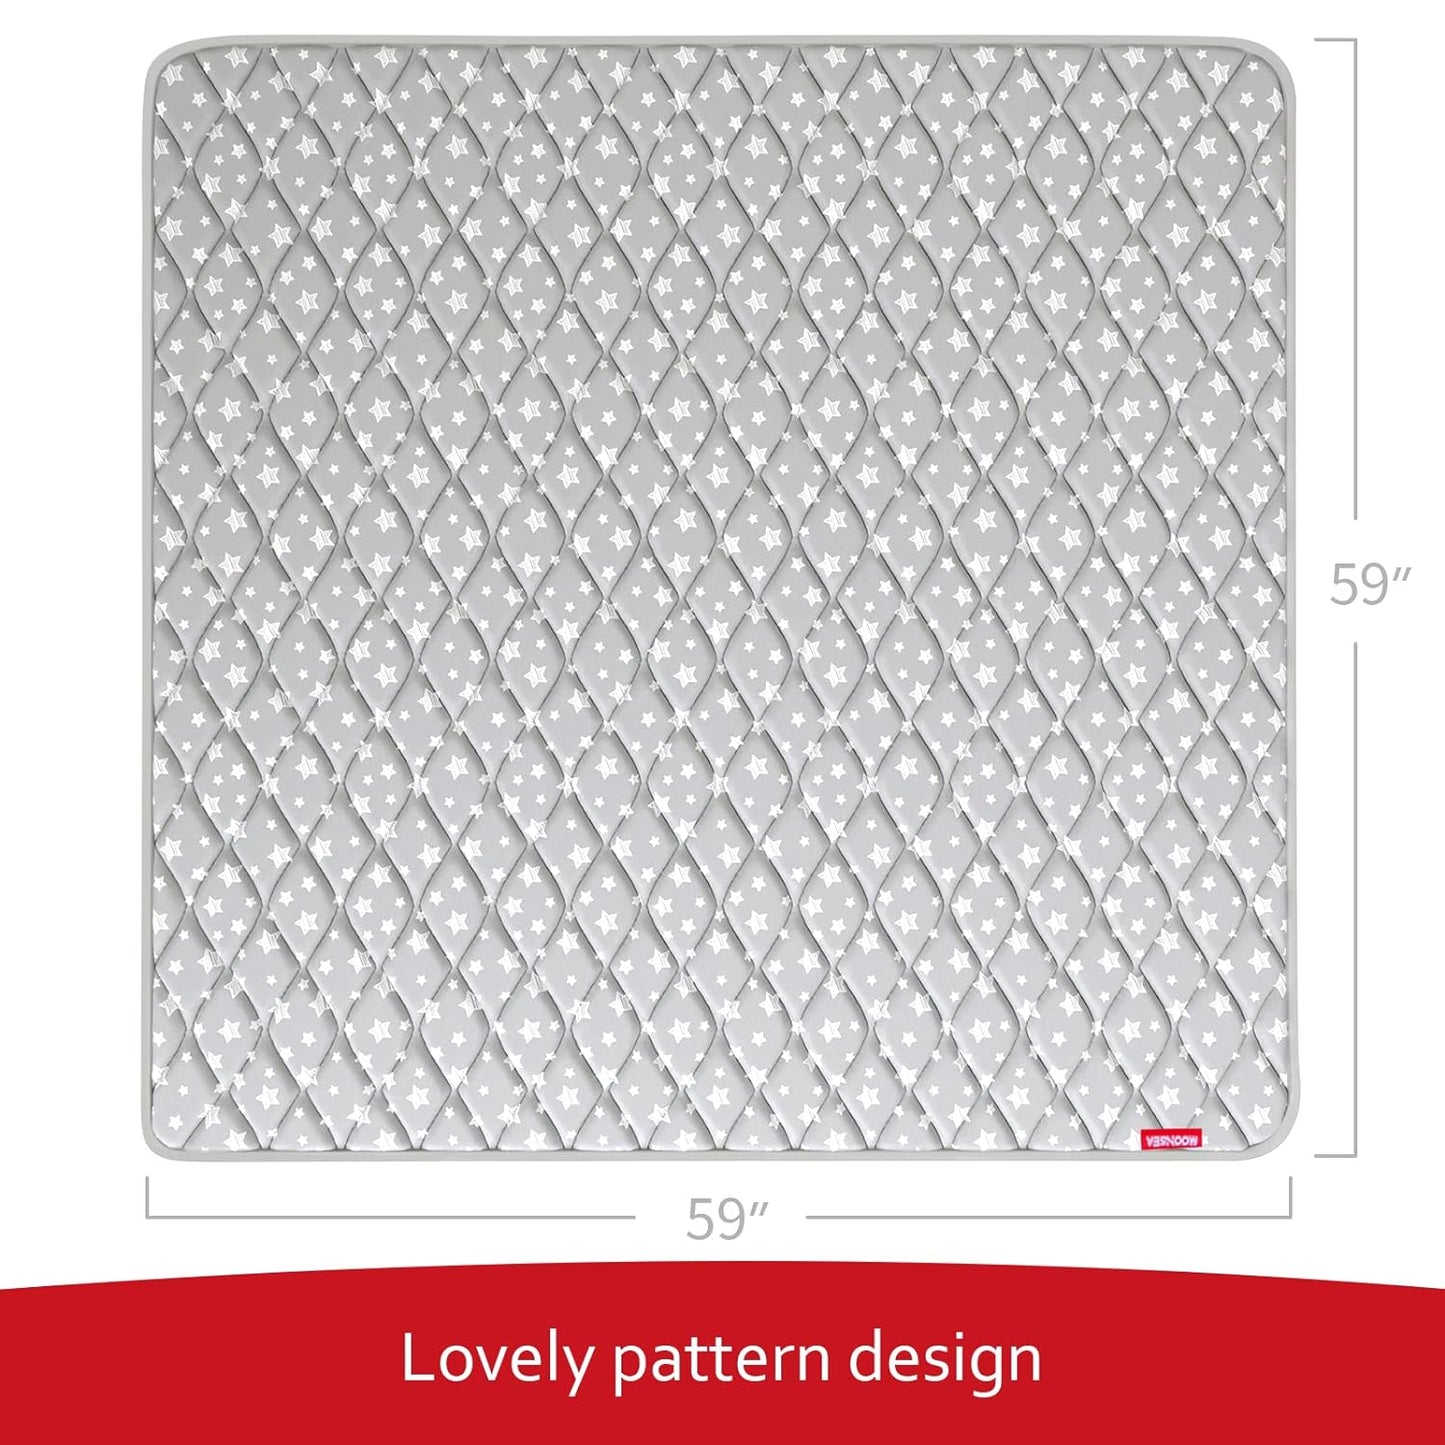 Premium Foam Baby Play Mat | Playpen Mat - Square 59" x 59", Thicker and Non-Toxic Crawling Mat for Infant & Toddler, Grey Star